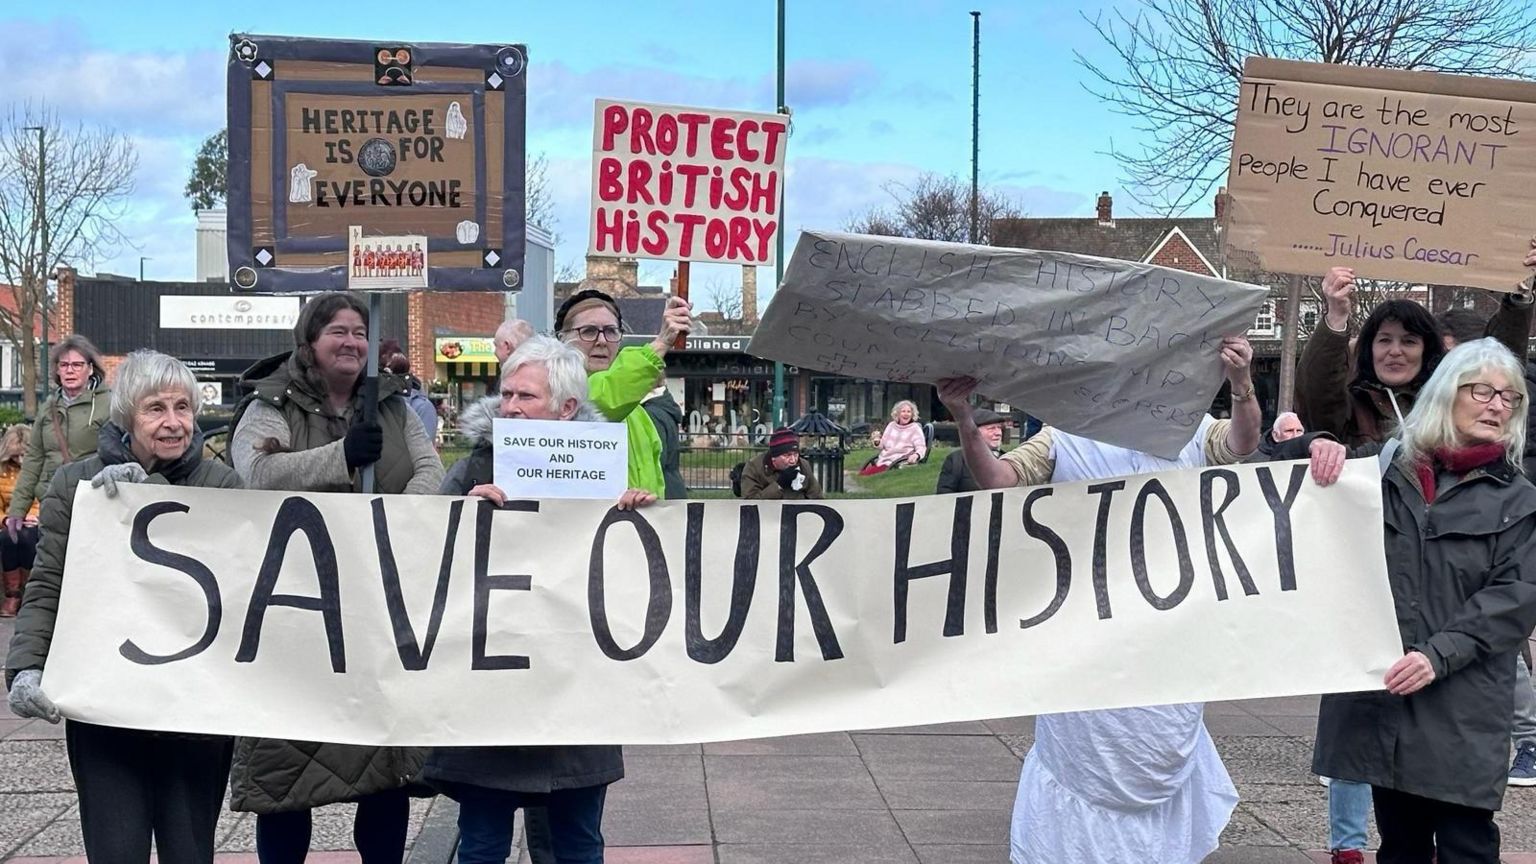 Save our History banners being held up at a protest against the development in Marske